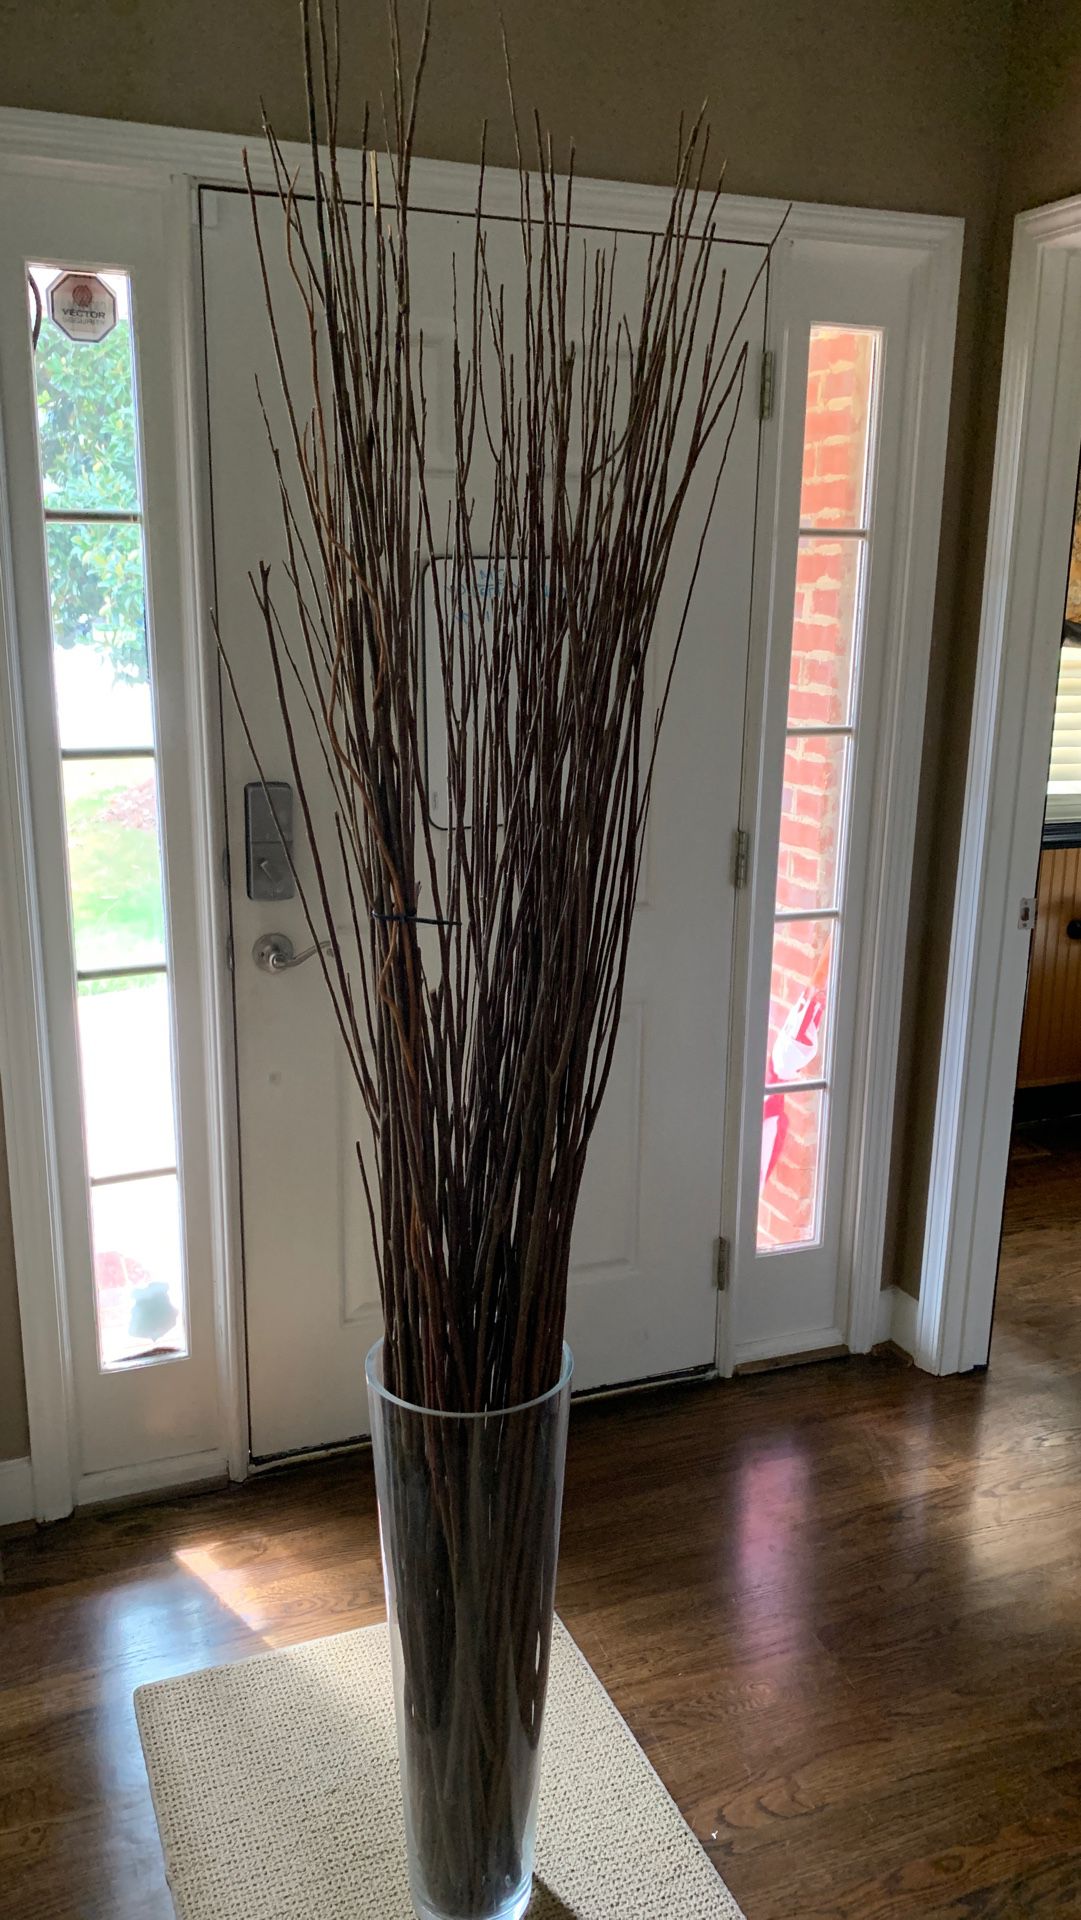 Two matching Tall heavy genuine glass vases with long branches for decor. Came from IkeA